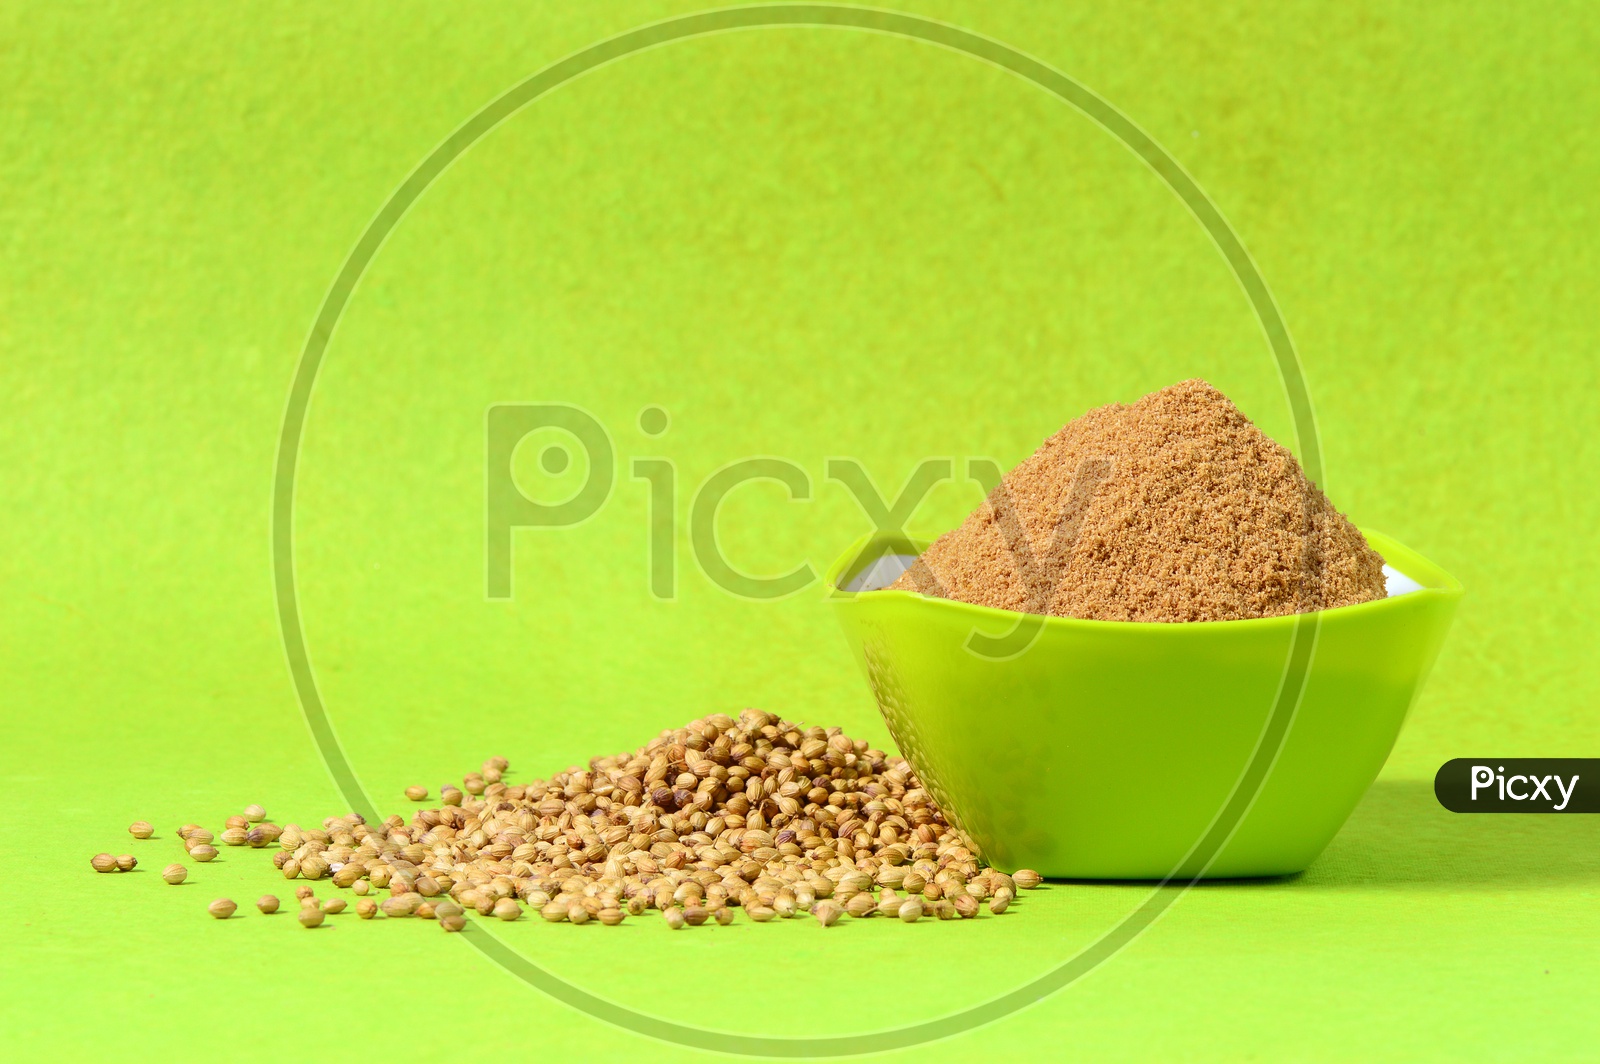 Coriander seeds and Powdered coriander in green bowl on green background.